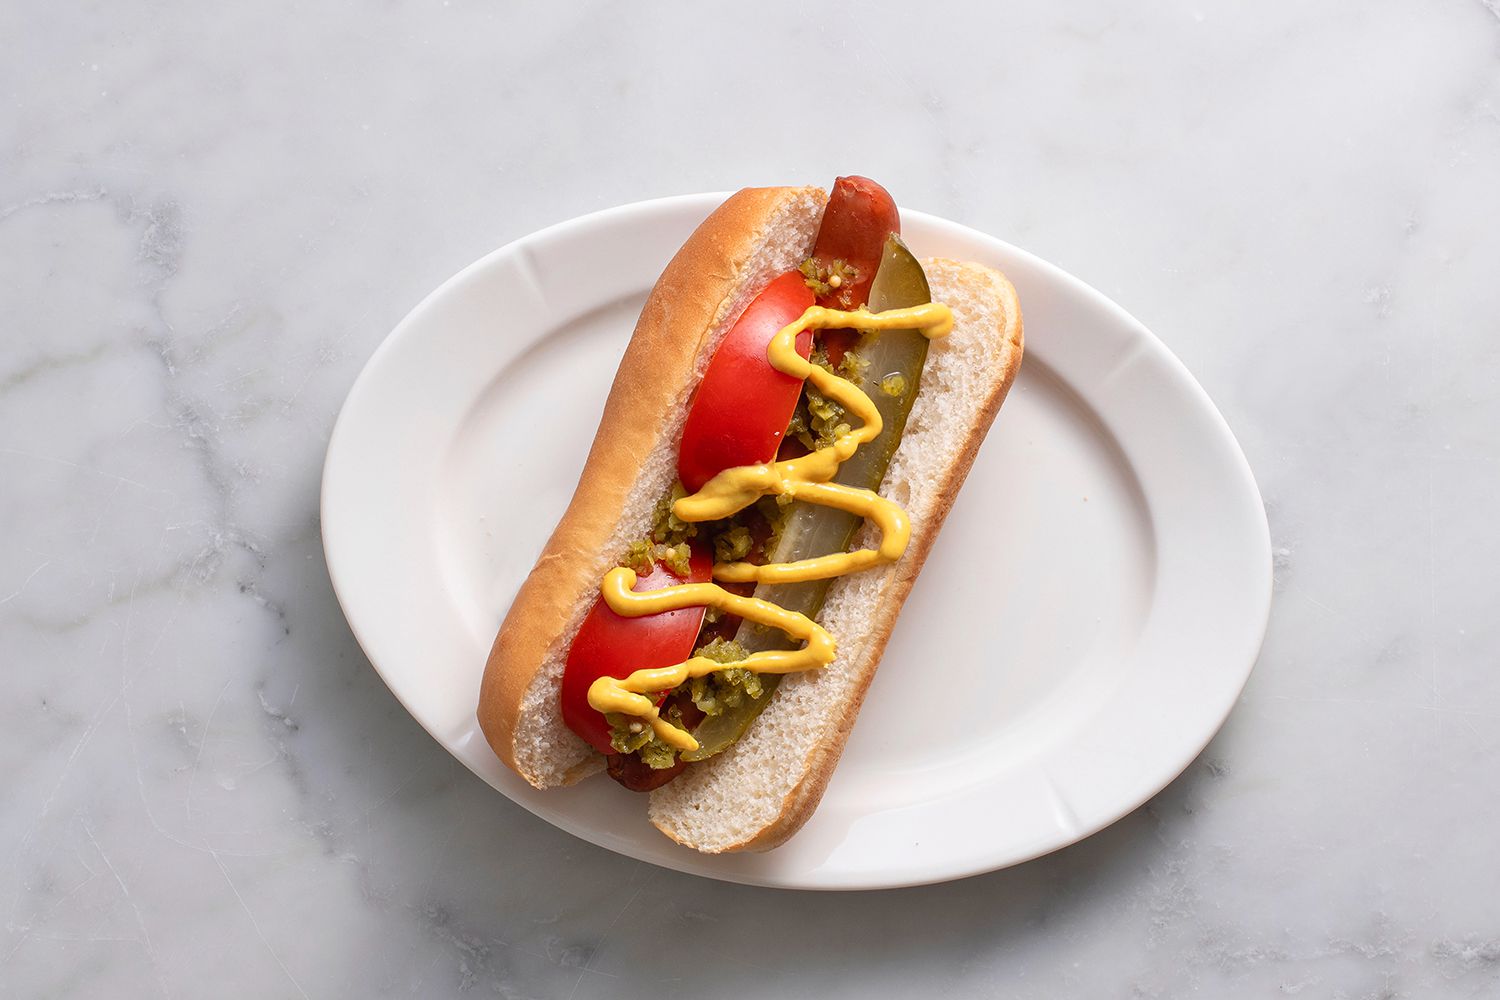 Hot dog topped with relish and mustard